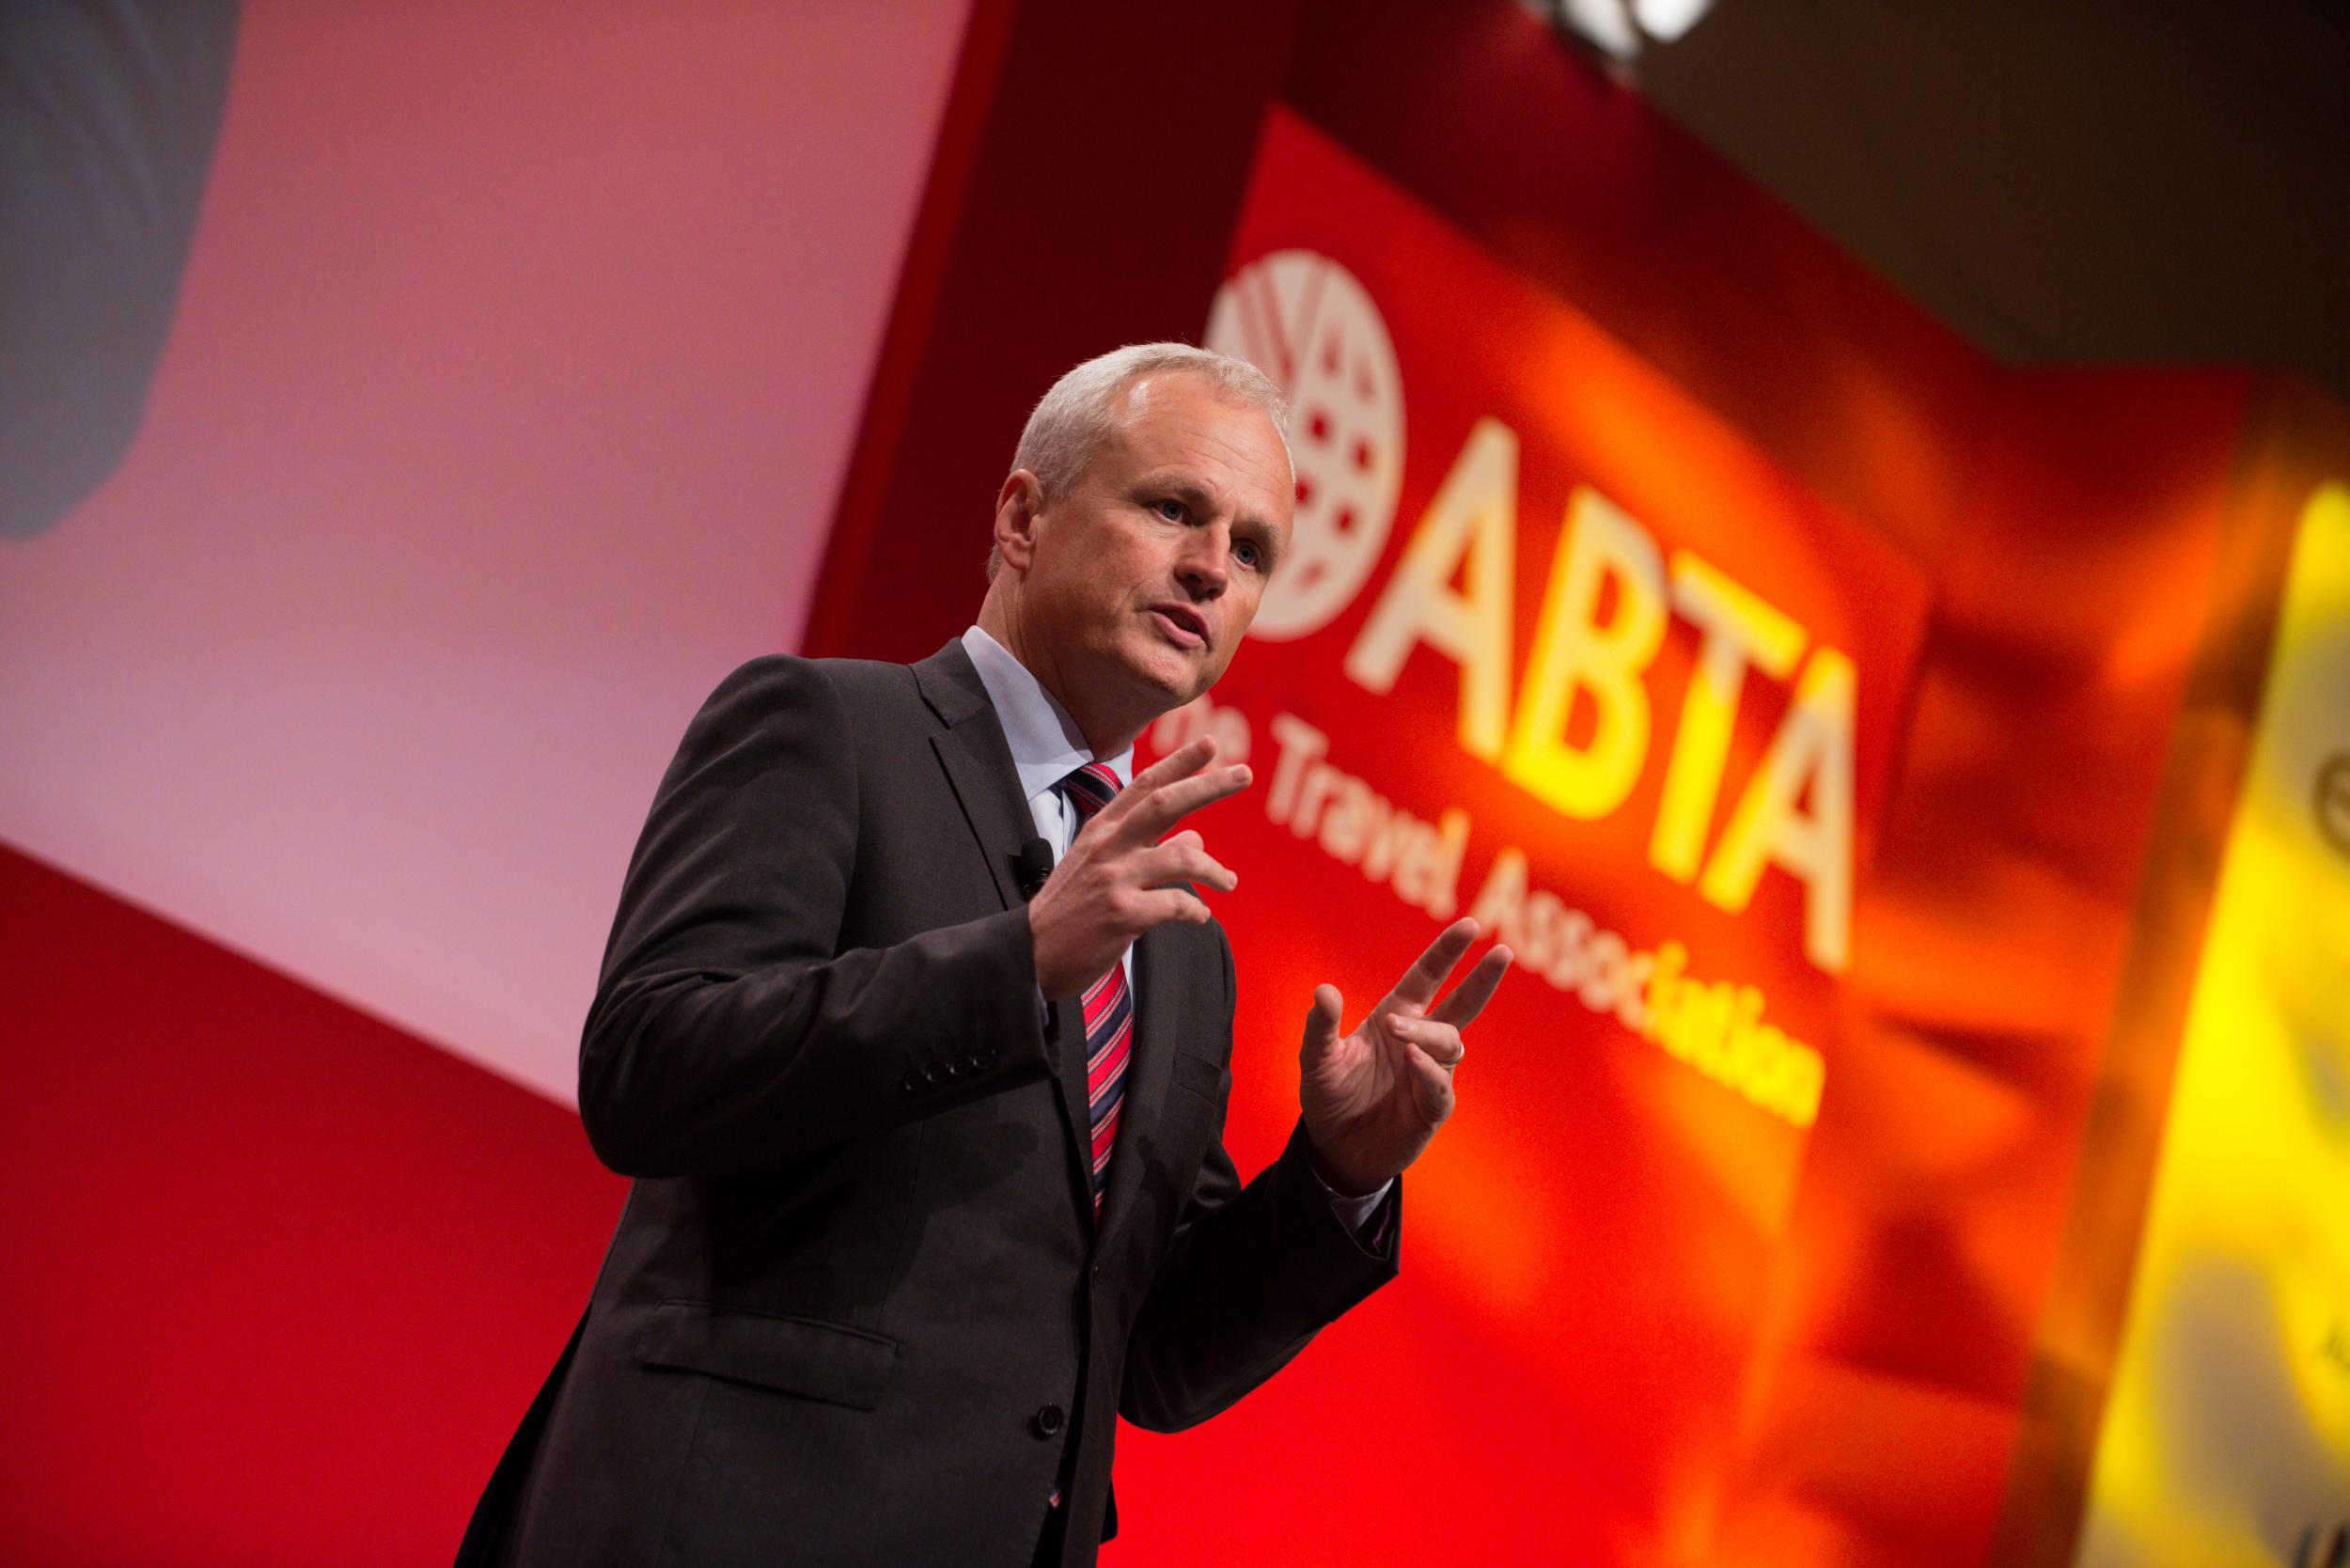 Still standing: Monarch CEO Andrew Swaffield at the Abta Convention, Abu Dhabi